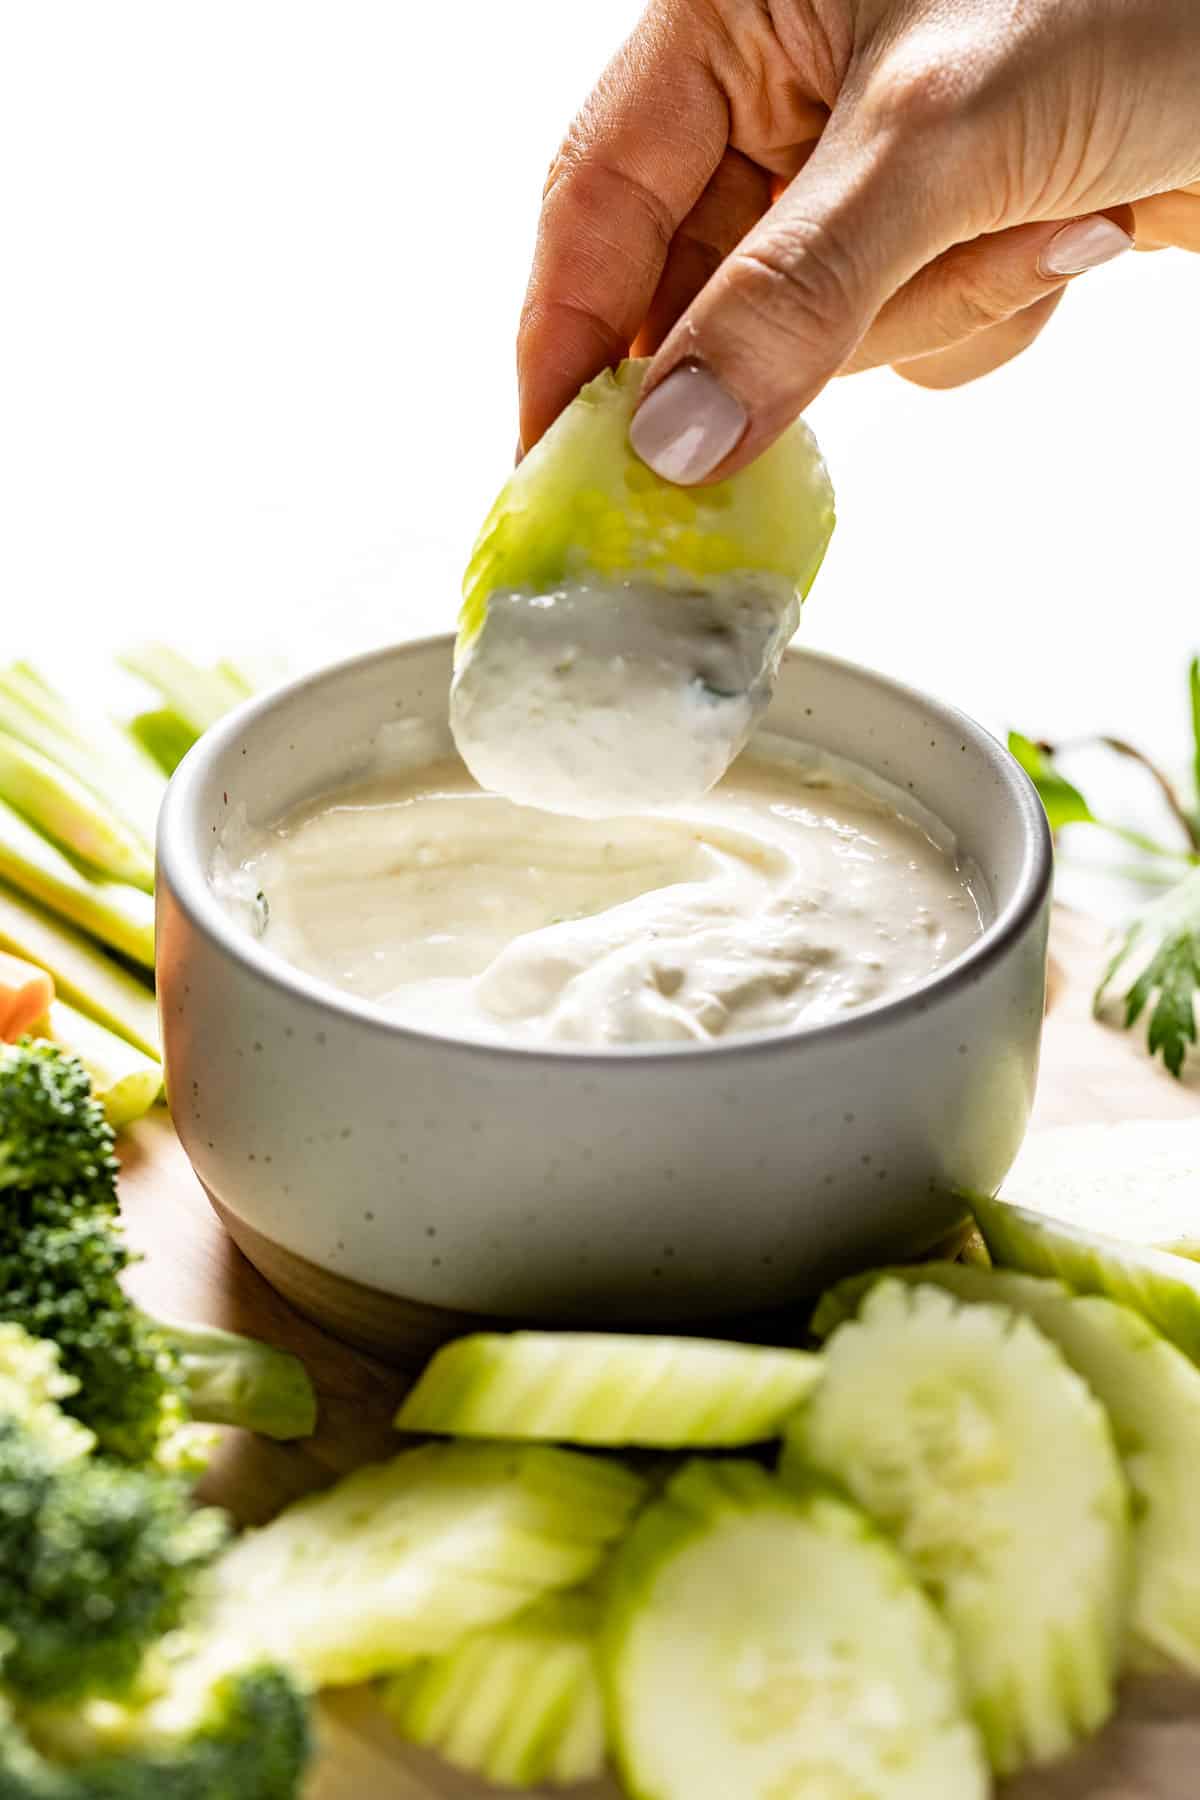 A person dipping a cucumber into a veggie dip from the side view. 